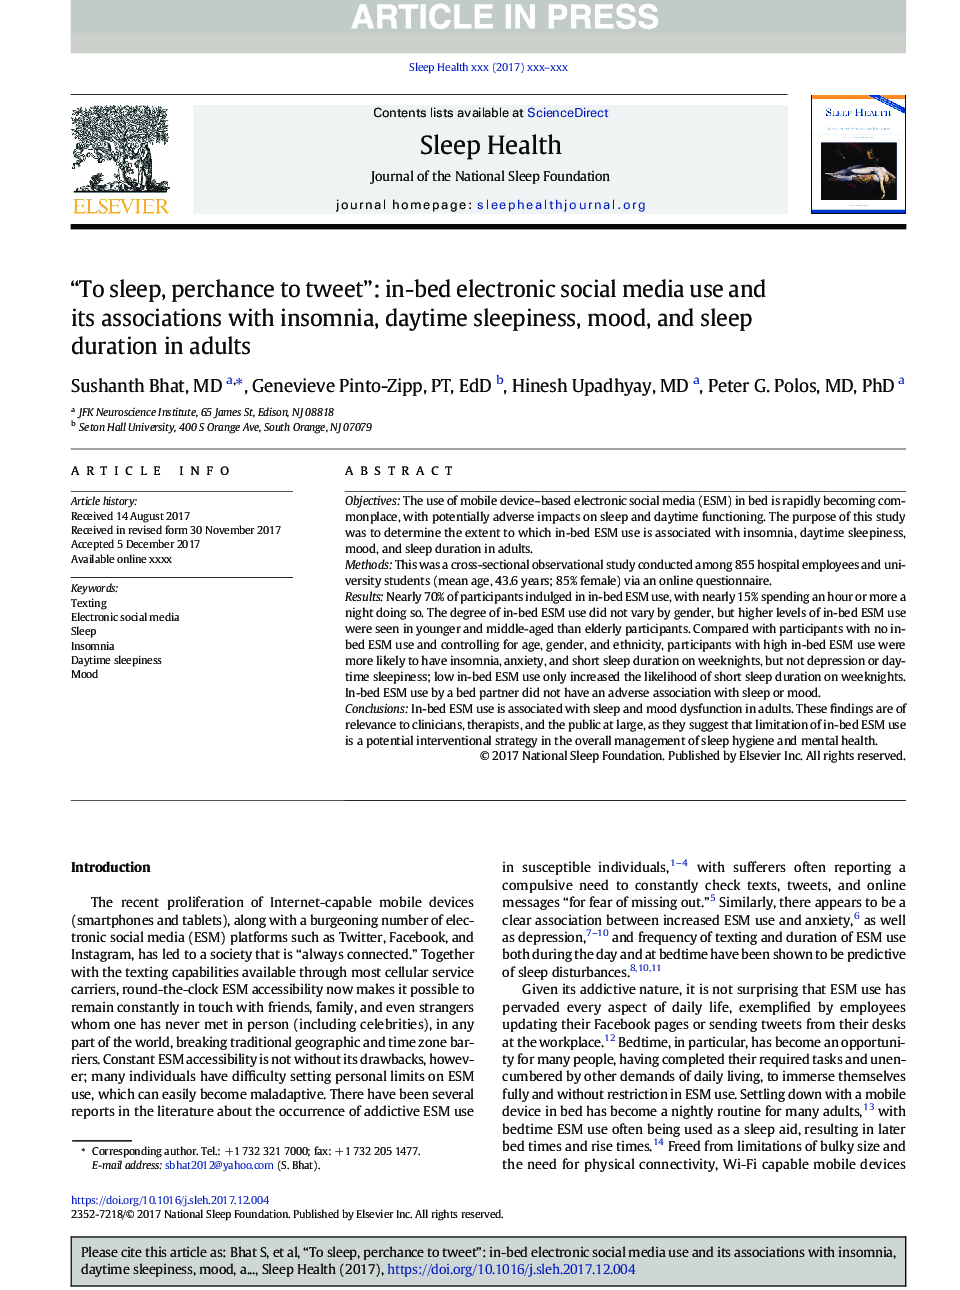 “To sleep, perchance to tweet”: in-bed electronic social media use and its associations with insomnia, daytime sleepiness, mood, and sleep duration in adults